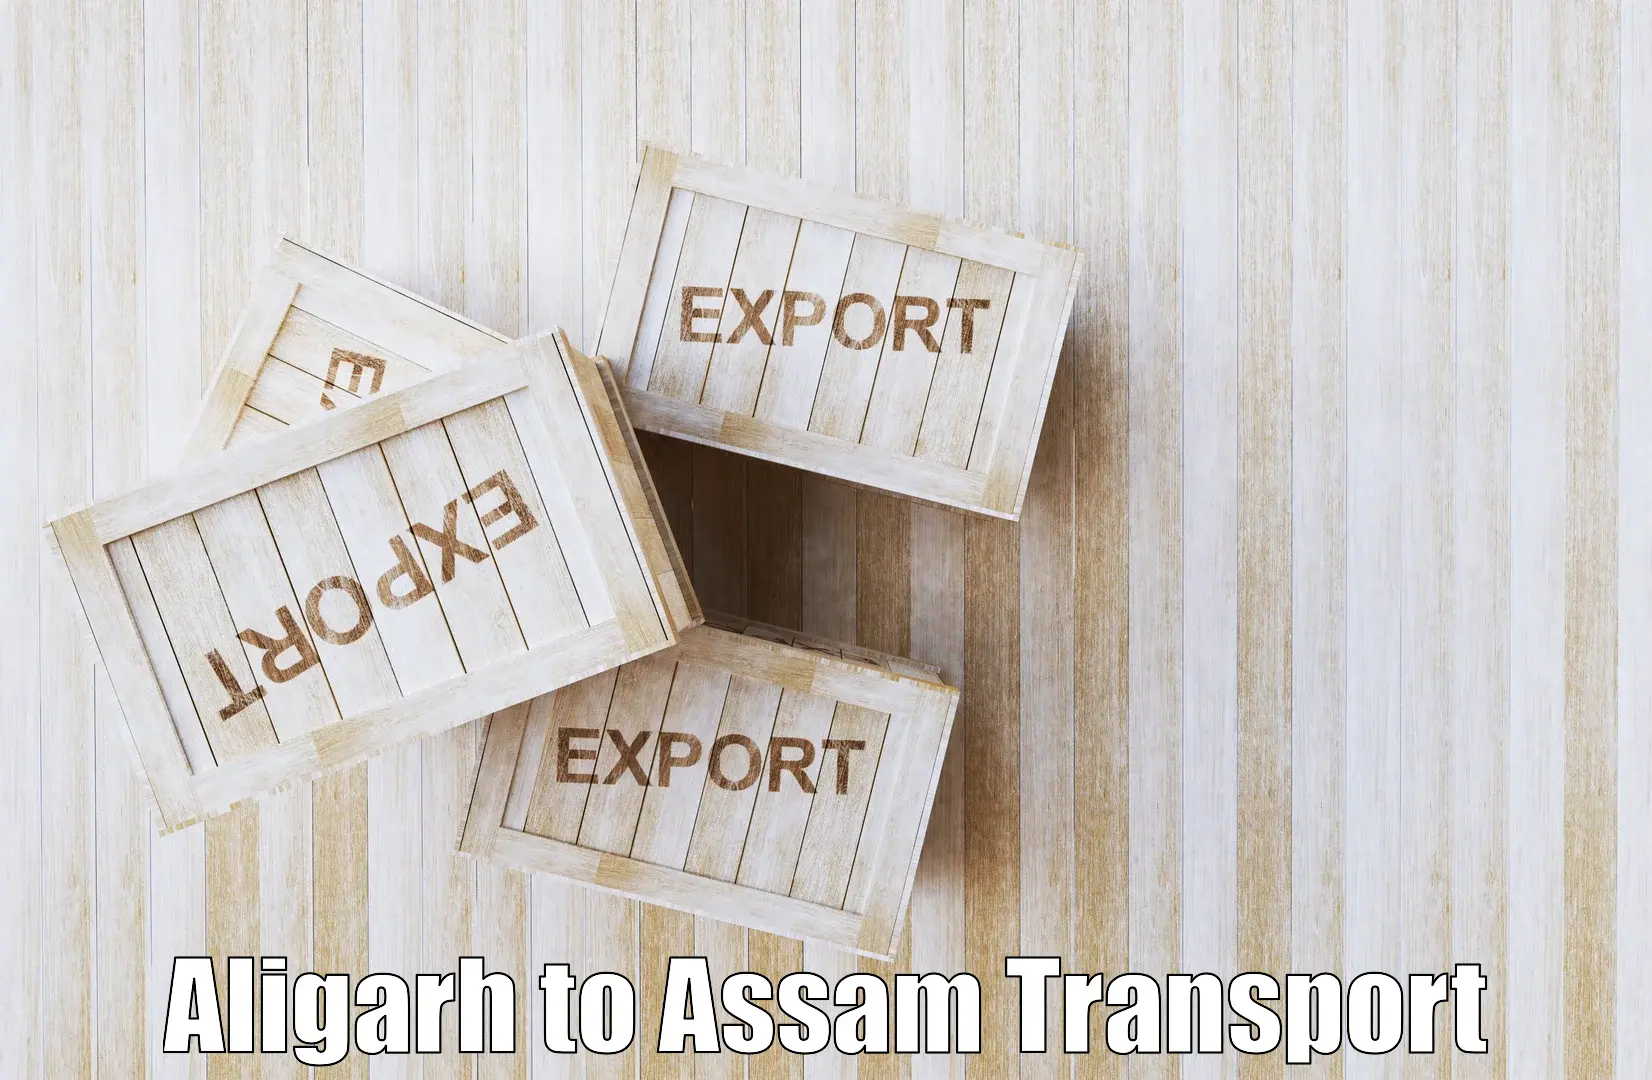 Express transport services Aligarh to Lala Assam